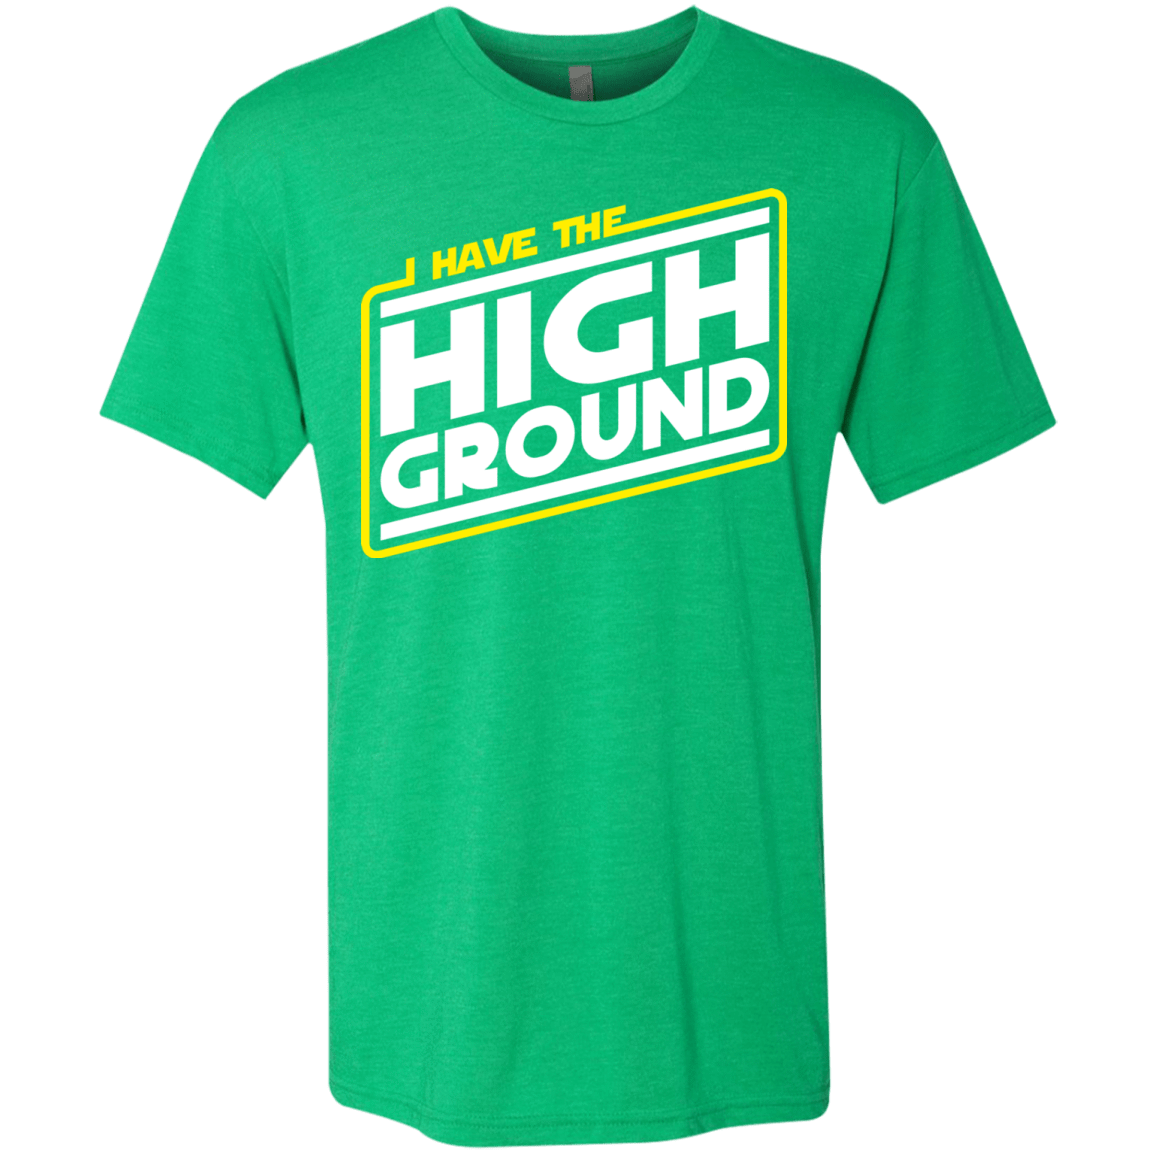 T-Shirts Envy / S I Have the High Ground Men's Triblend T-Shirt